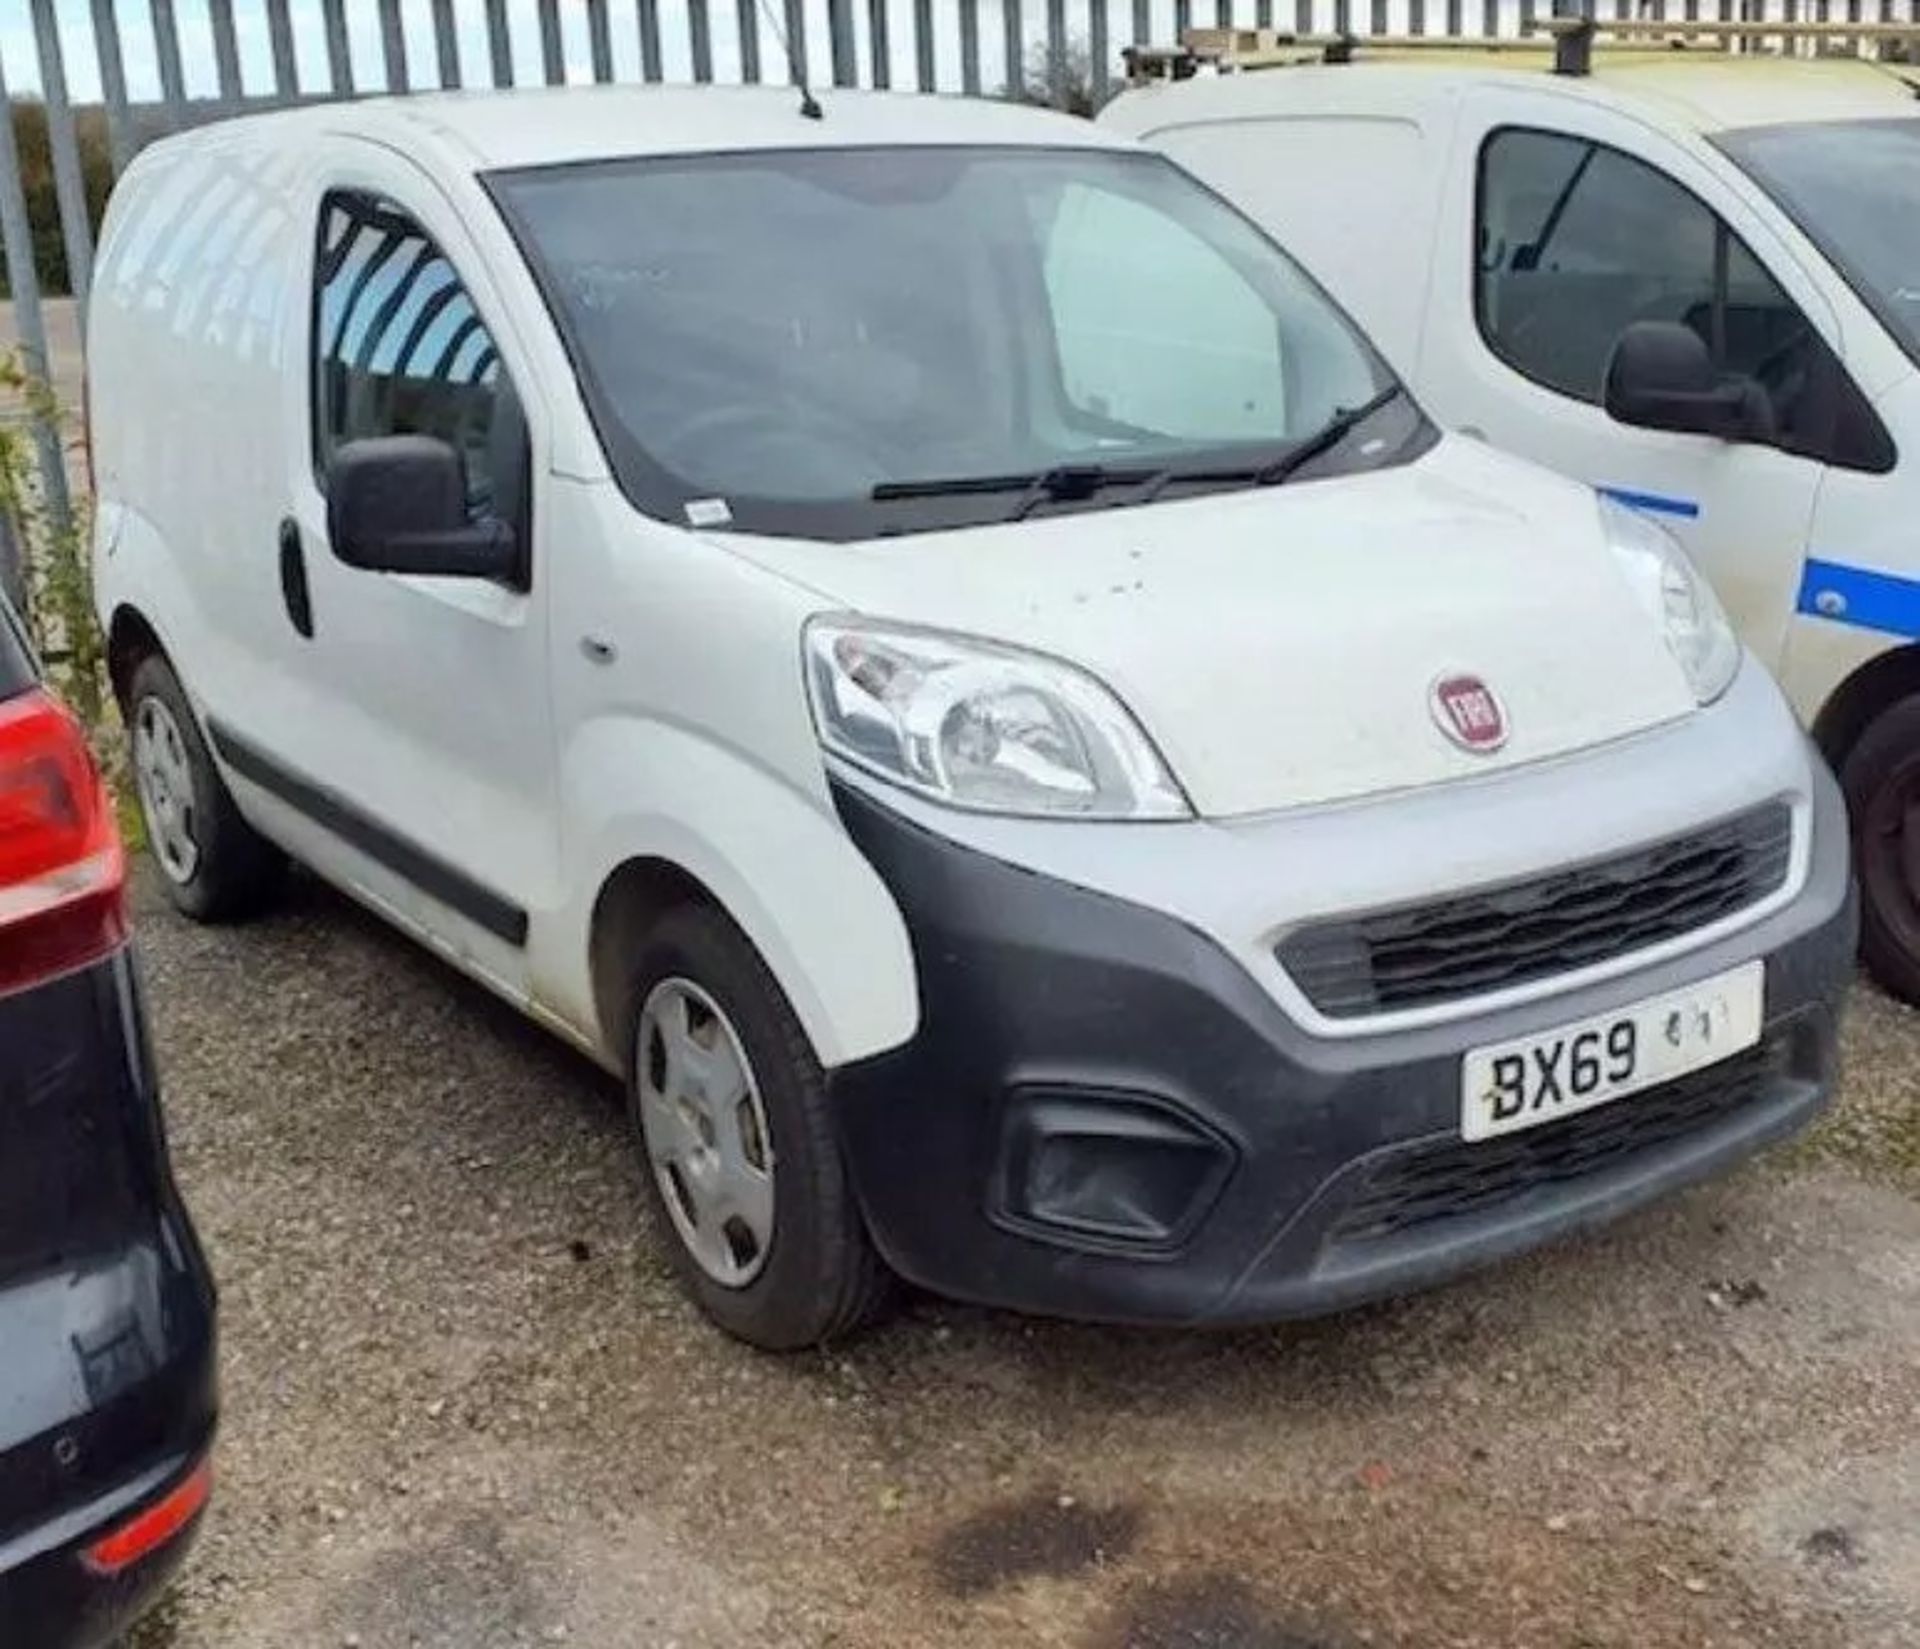 2019 FIAT FIORINO HDI VAN - 1 OWNER, SOLD AS NON-RUNNER, V5 LOG BOOK PRESENT (SPARES OR REPAIRS) - Image 5 of 7